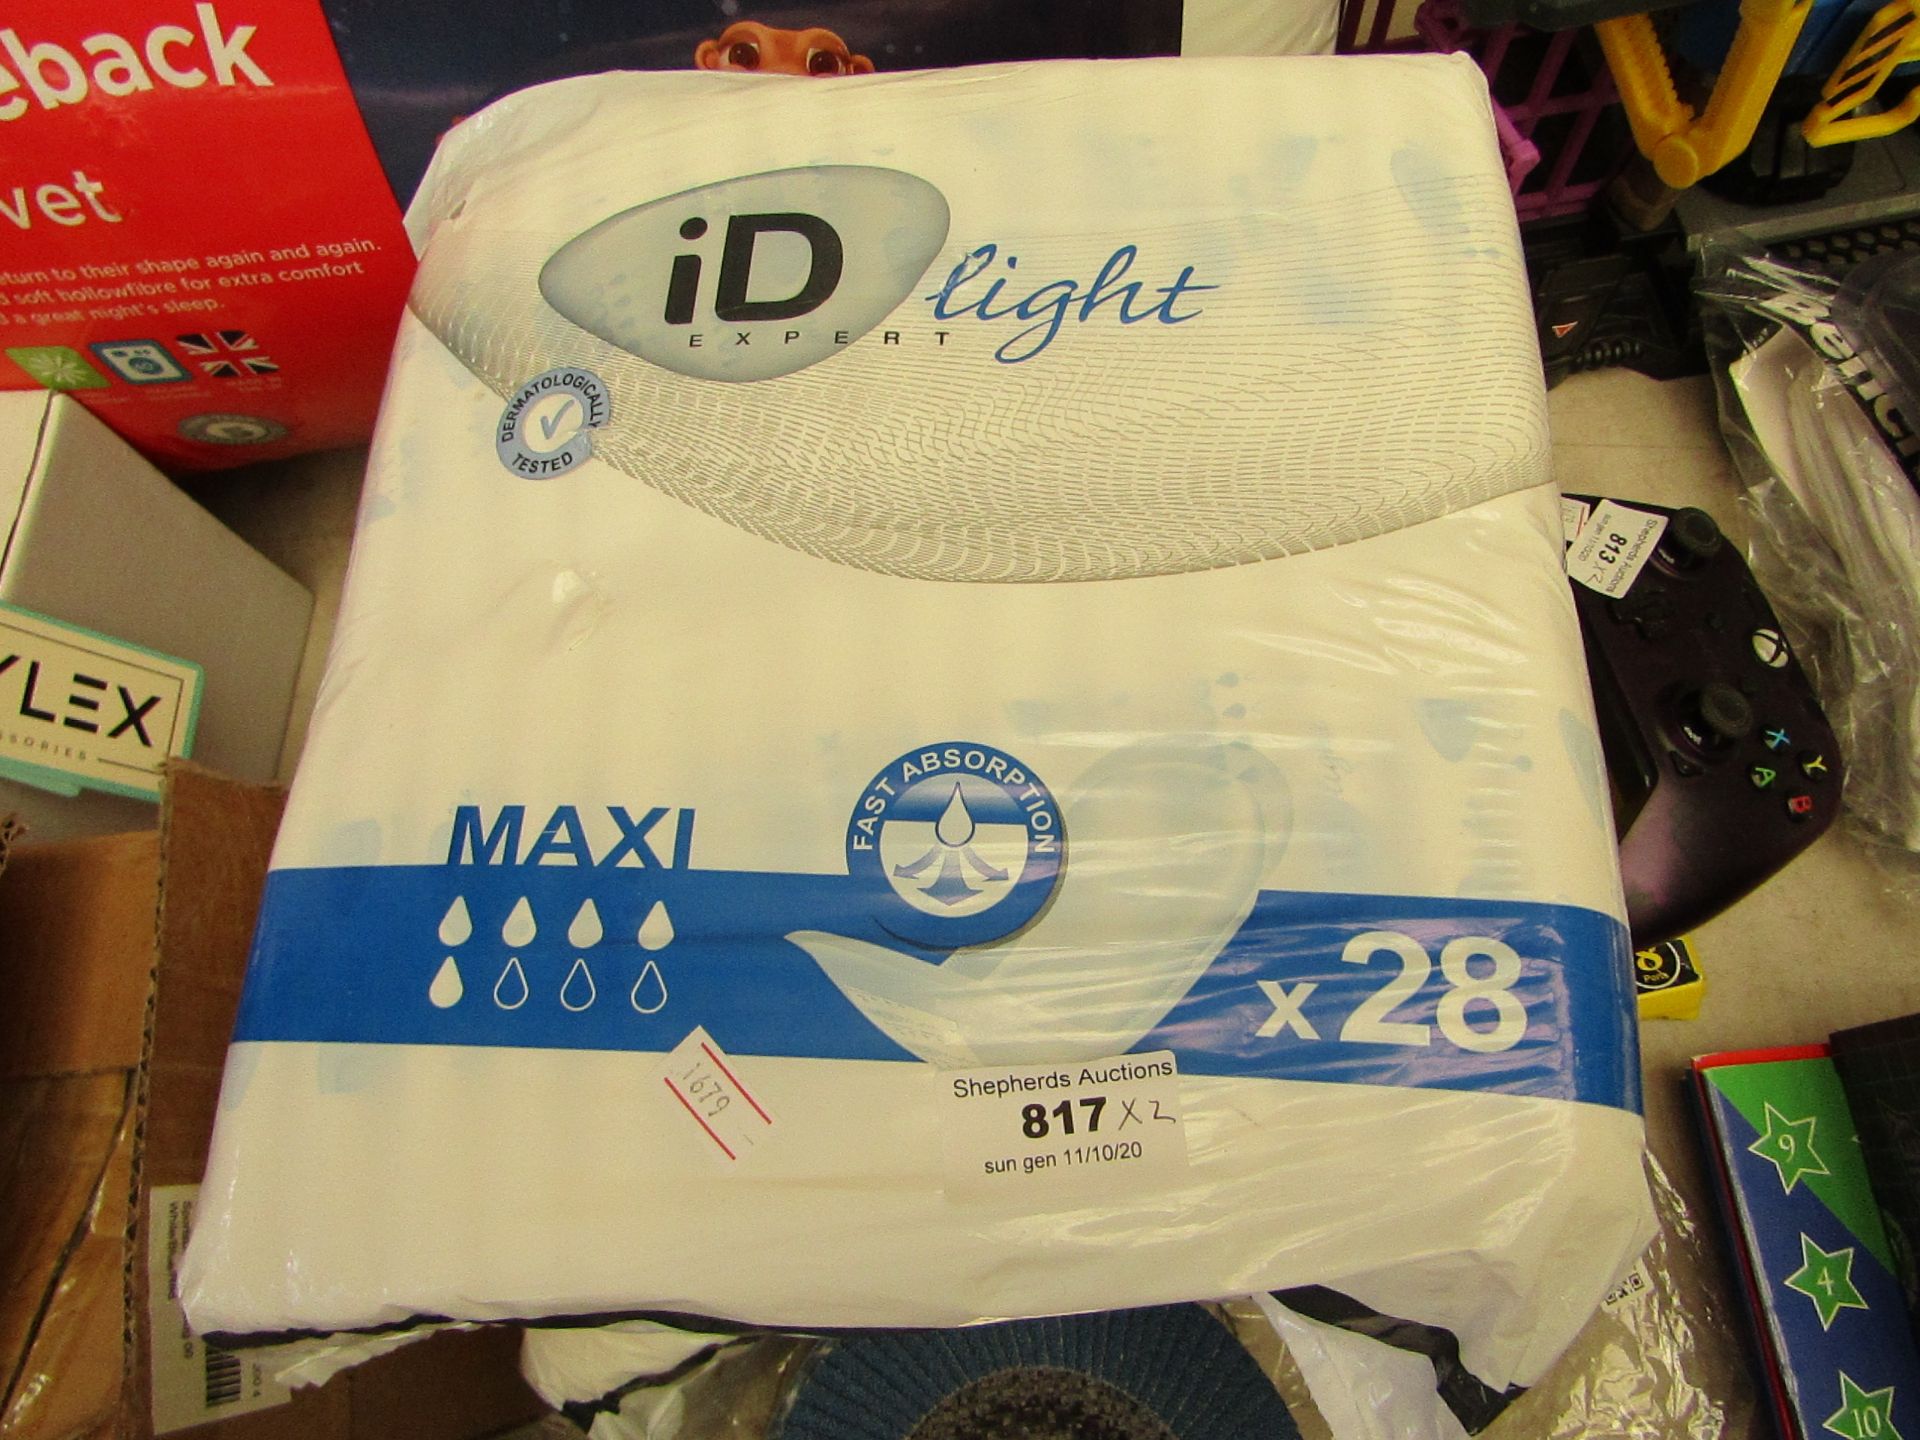 2 Packs of 28 ID Light maxi. New & Packaged